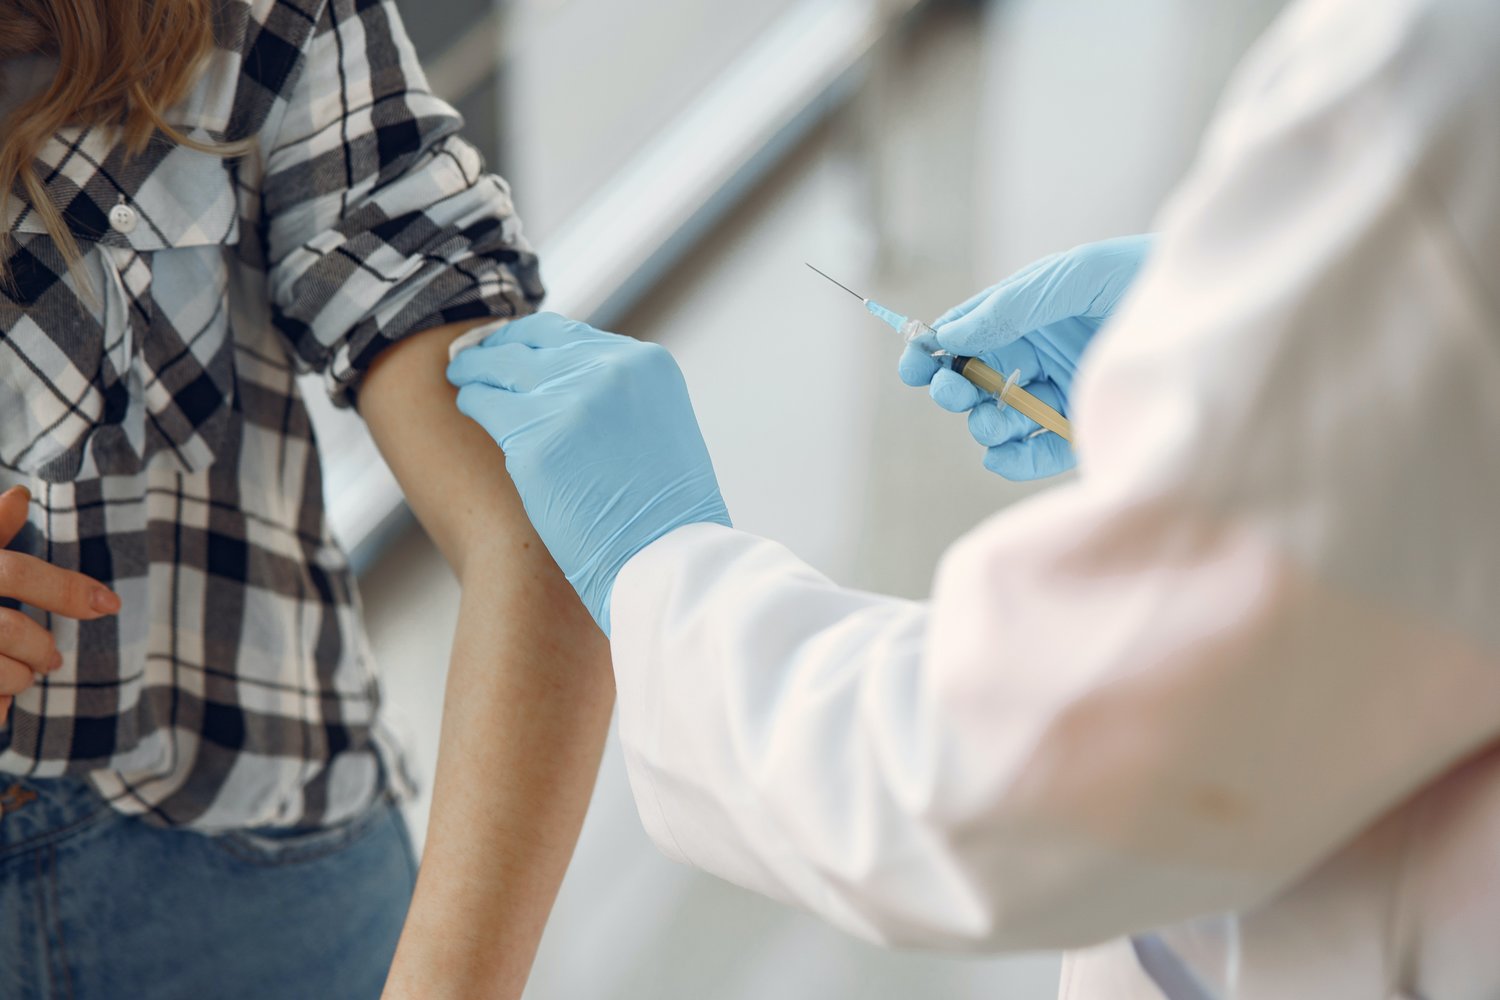 Drs. Luis Benavides, Carlos Cardenas and Roxanne Tyroch are Texas-based physicians who posit that getting the COVID-19 vaccine is the best way for Texans to help the state reach the end of the pandemic.